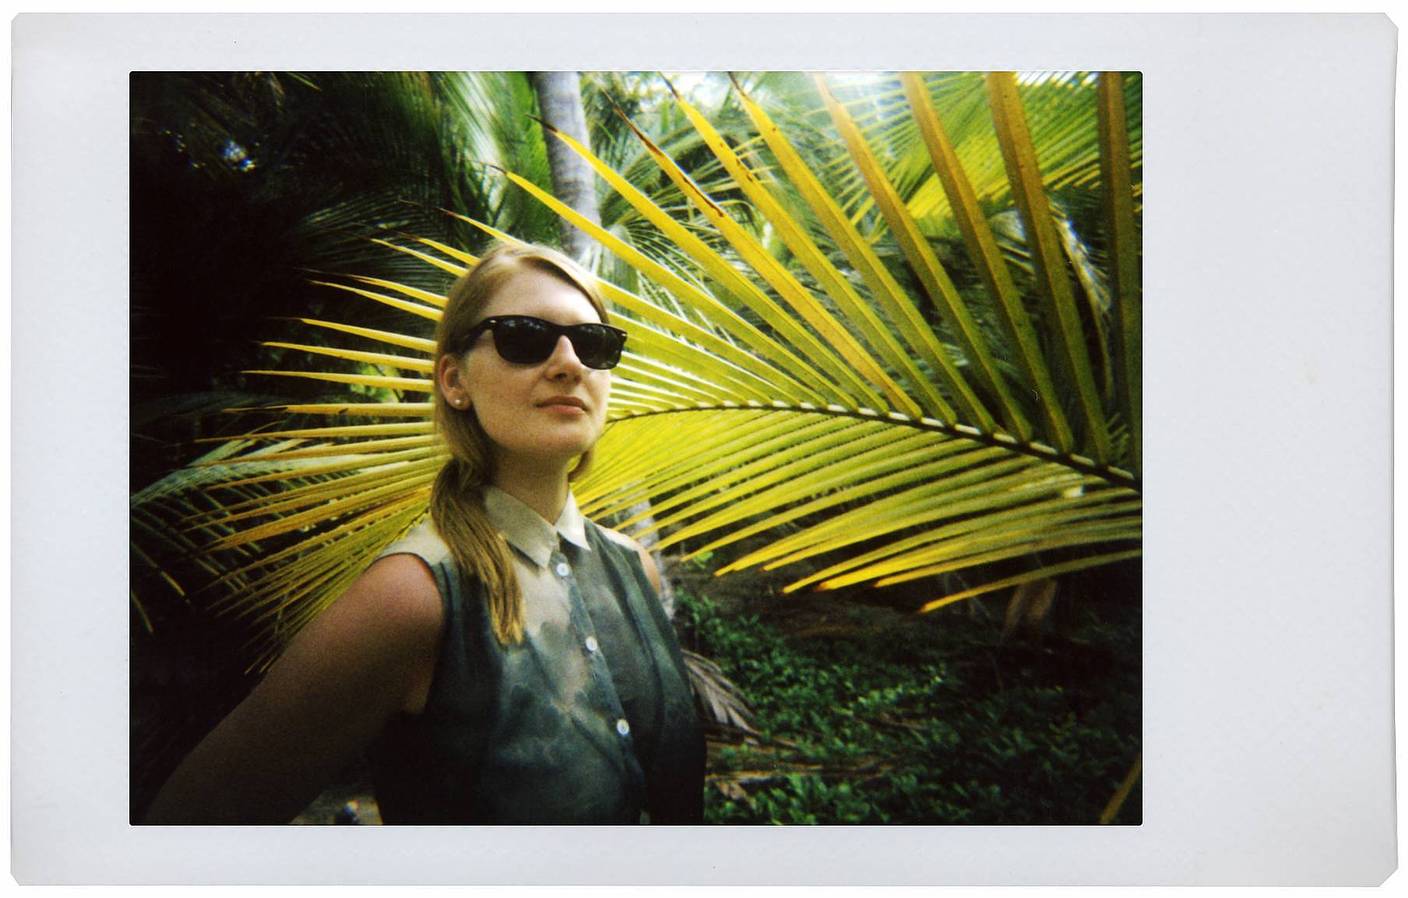 Around the World with the Lomo'Instant Competition
